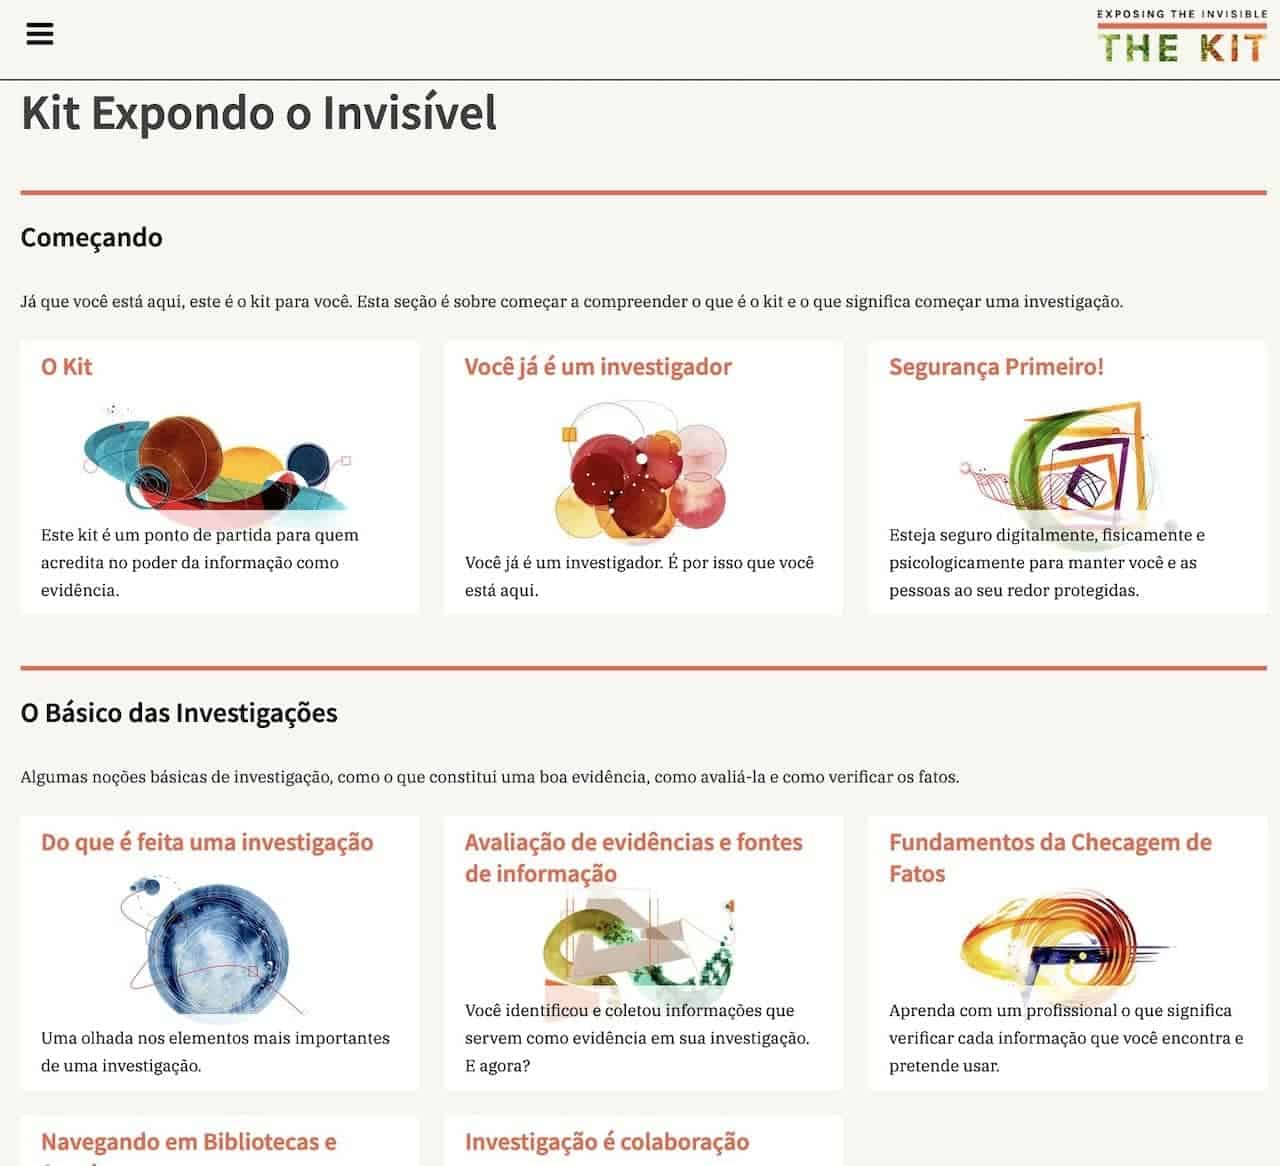 Screenshot of the Exposing the Invisible website in portuguese. On a light yellow background, a grid arrangement of 6 small abstract images with the following texts below each one: The Kit; You are already an investigator; Safety first!; What is an investigation made of; Evaluation of evidence and sources of information; Fundamentals of fact checking. And more titles Browsing Libraries and Archives for Investigations; and Research is collaboration: how to make it work